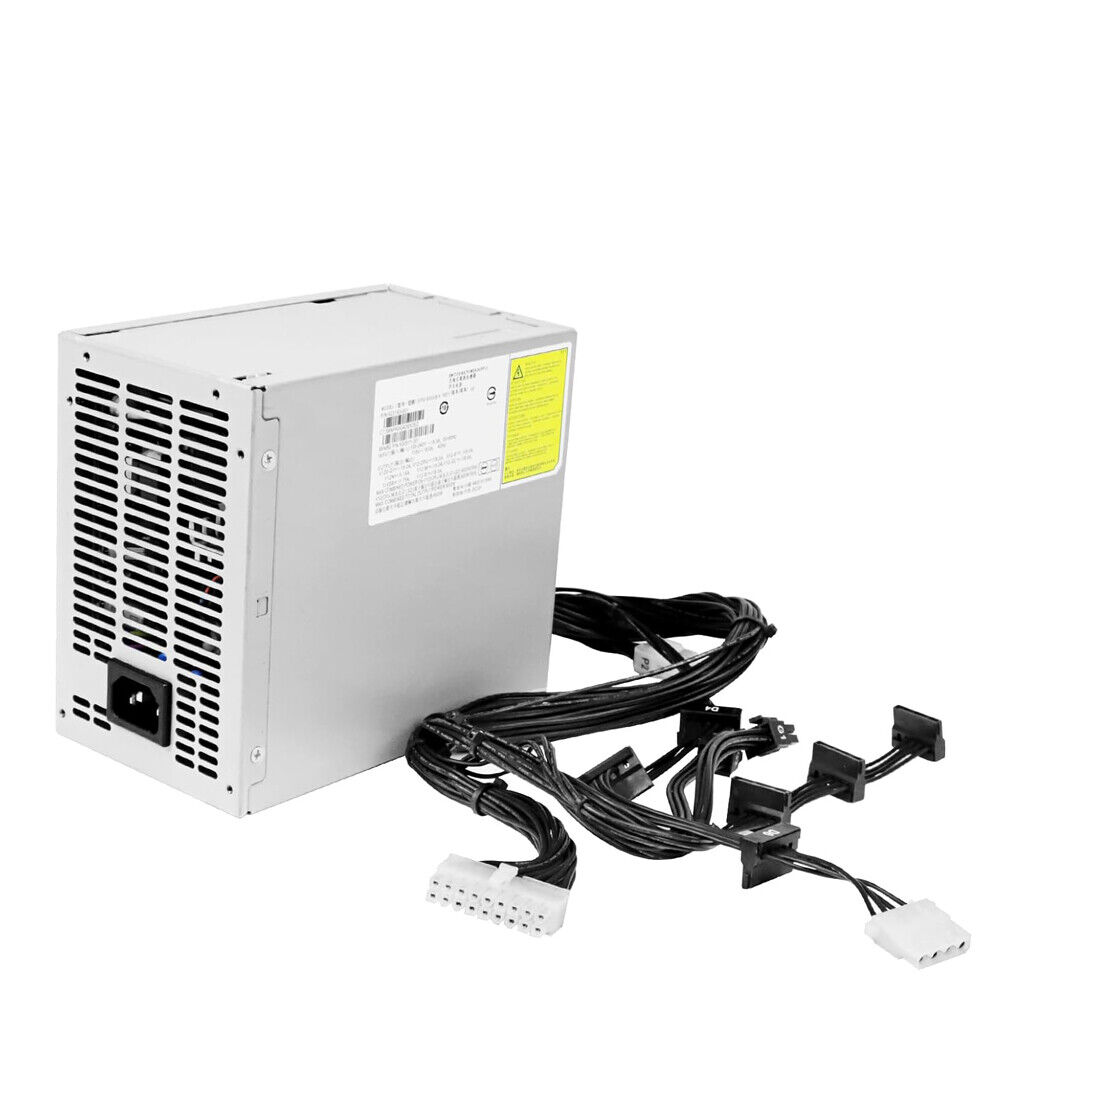 New DPS-600UB A 600W Power Supply Fit HP Z420 632911-001 623193-001 623193-003